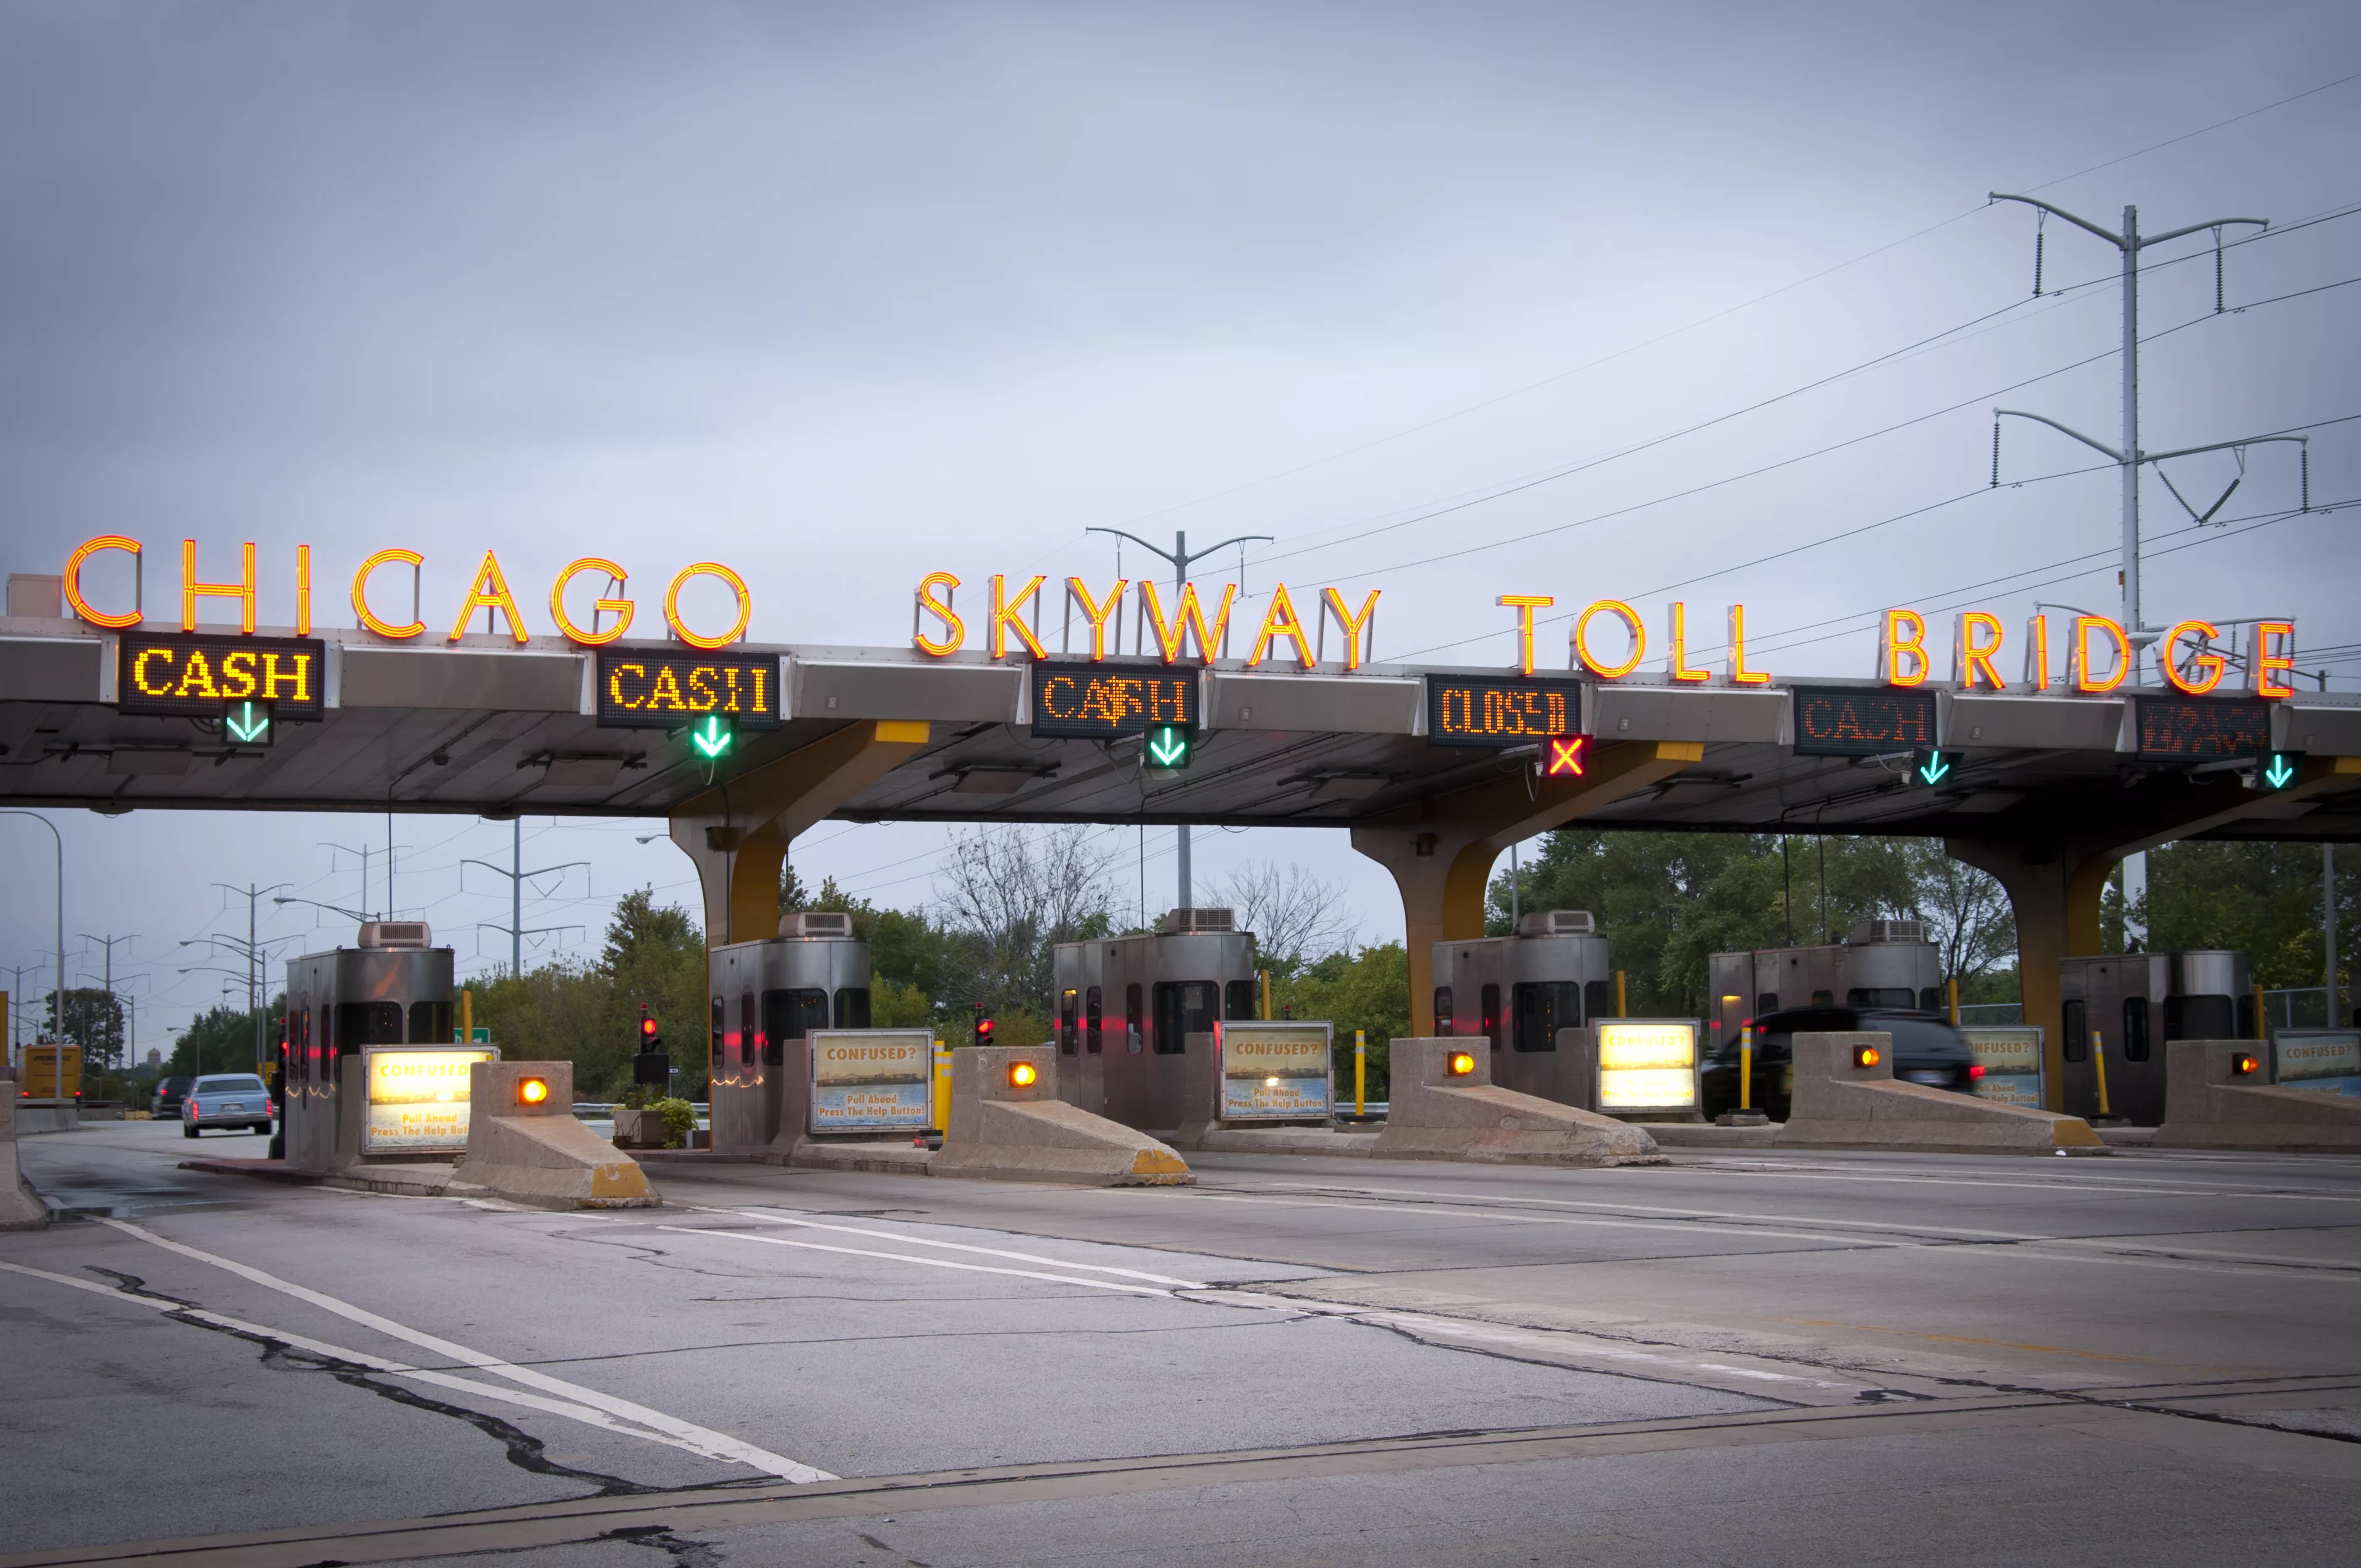 Chicago Skyway toll booth (Wikimedia Commons, author vxla)